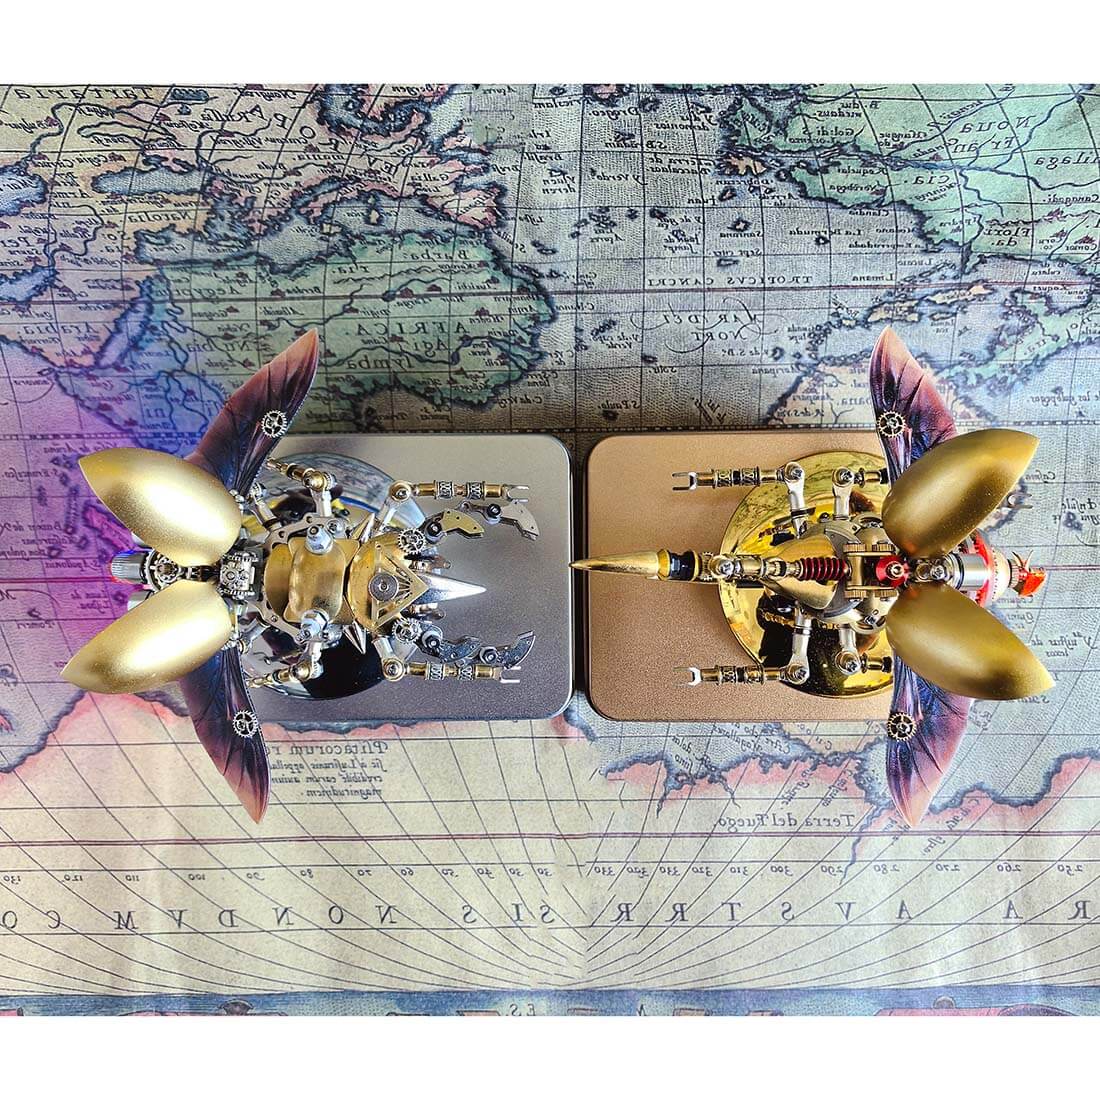 giraffe-stag-beetle-3d-diy-steampunk-insects-metal-puzzle-model-kits